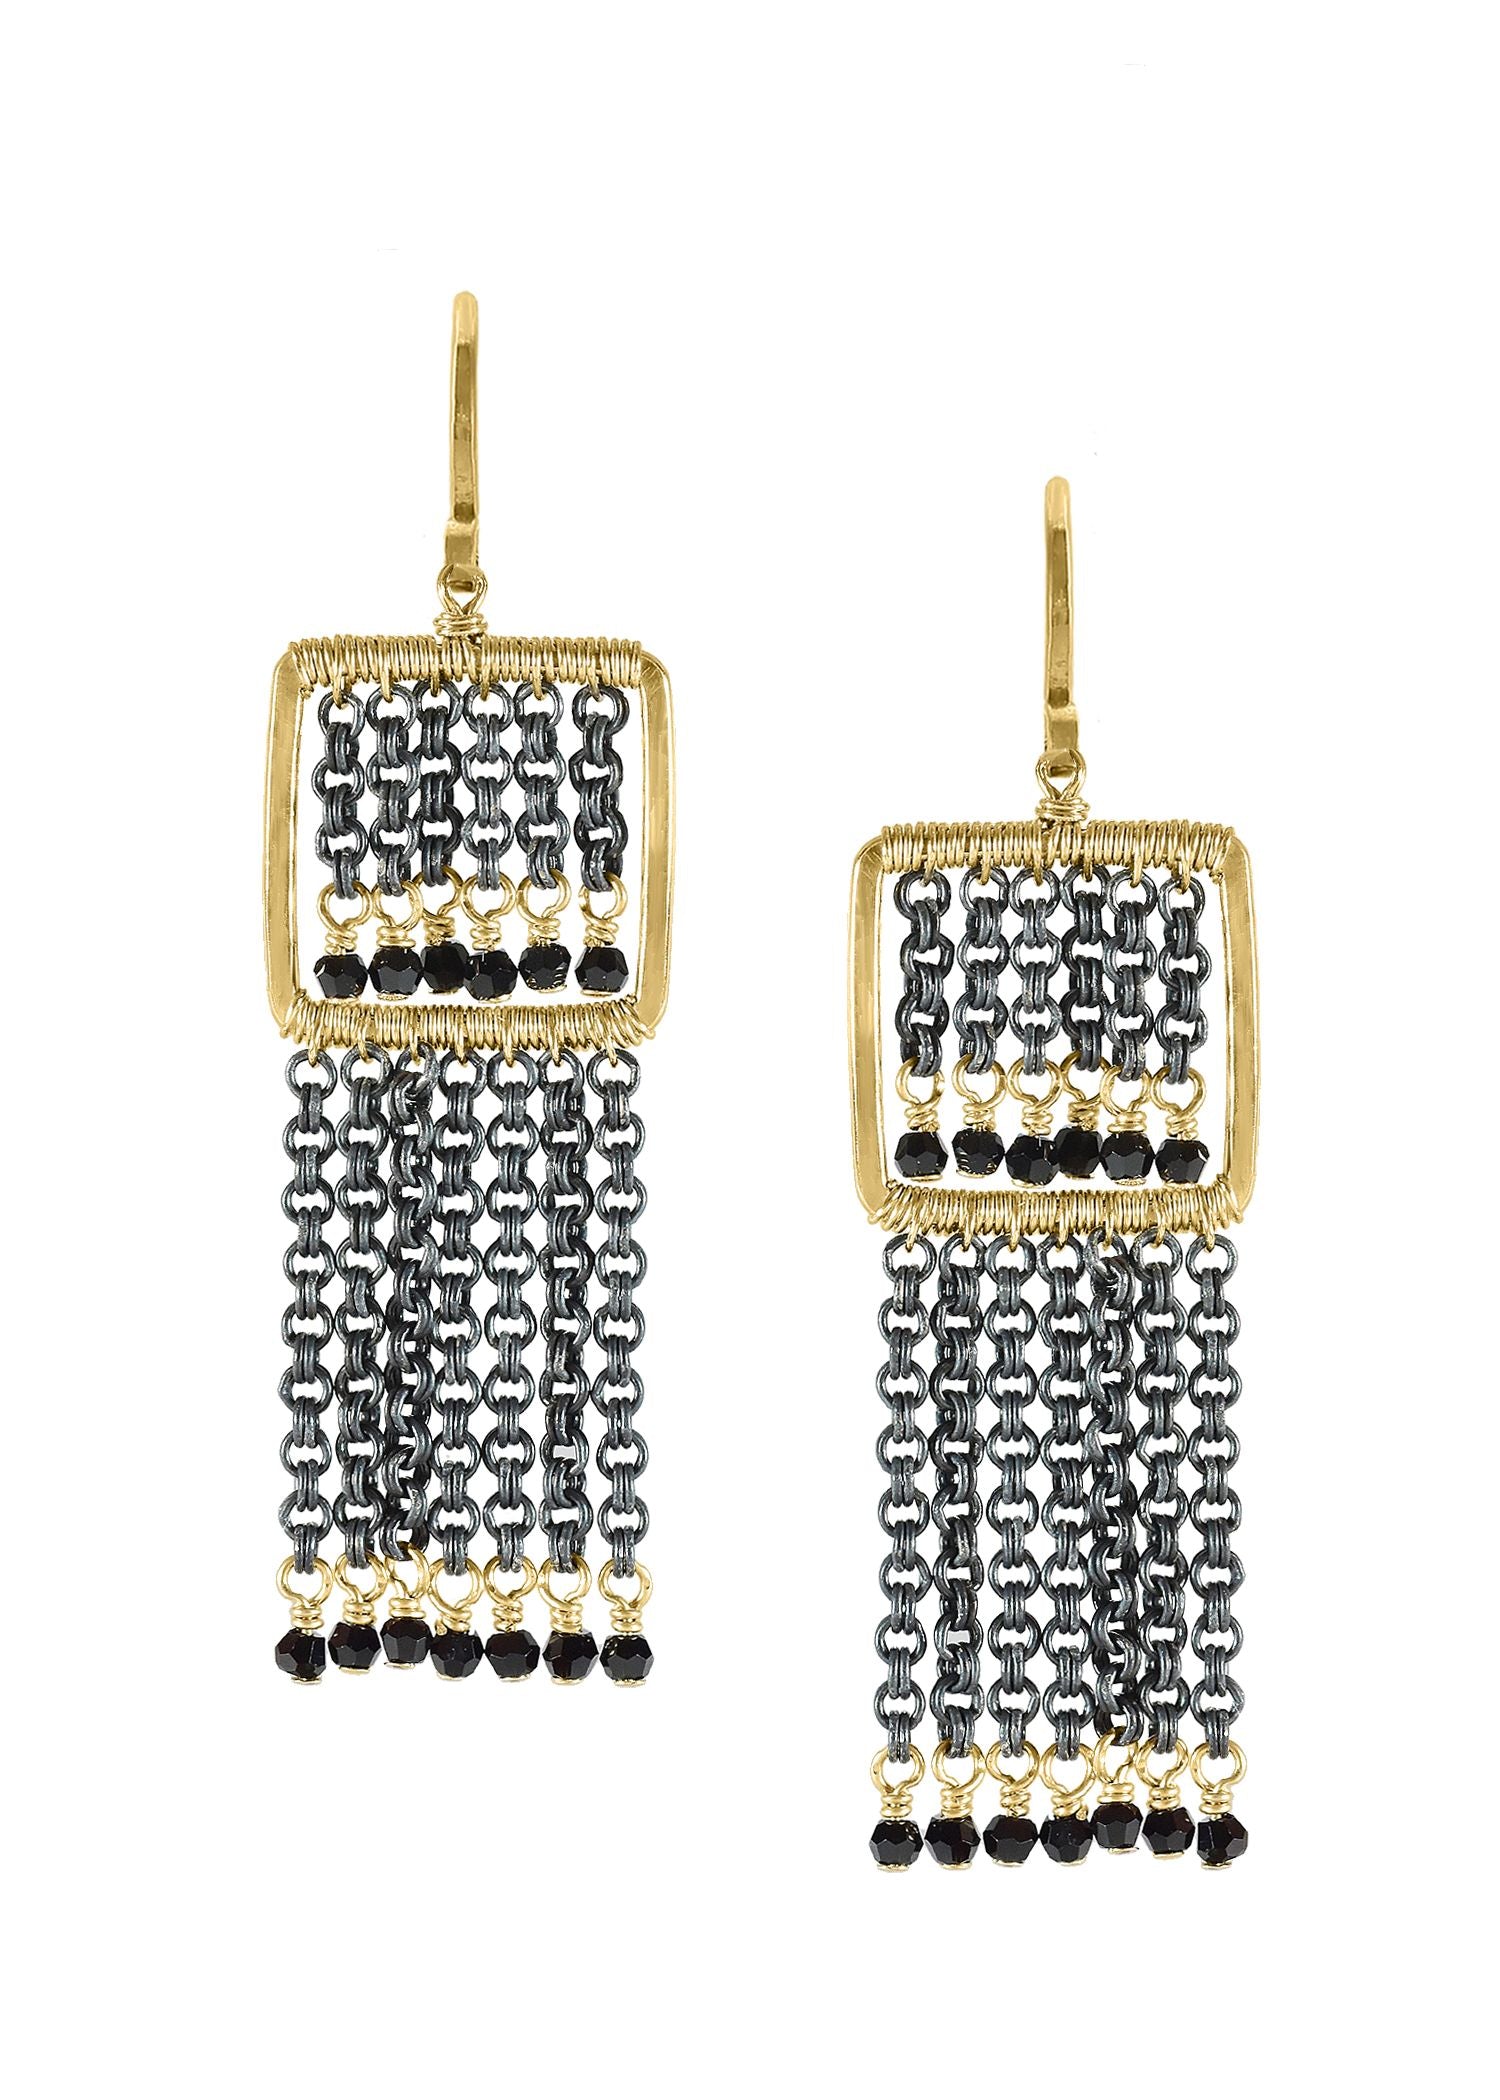 Crystal 14k gold fill Blackened sterling silver Mixed metal Earrings measure 1-3/4" in length (including the ear wires) and 9/16" in width Handmade in our Los Angeles studio